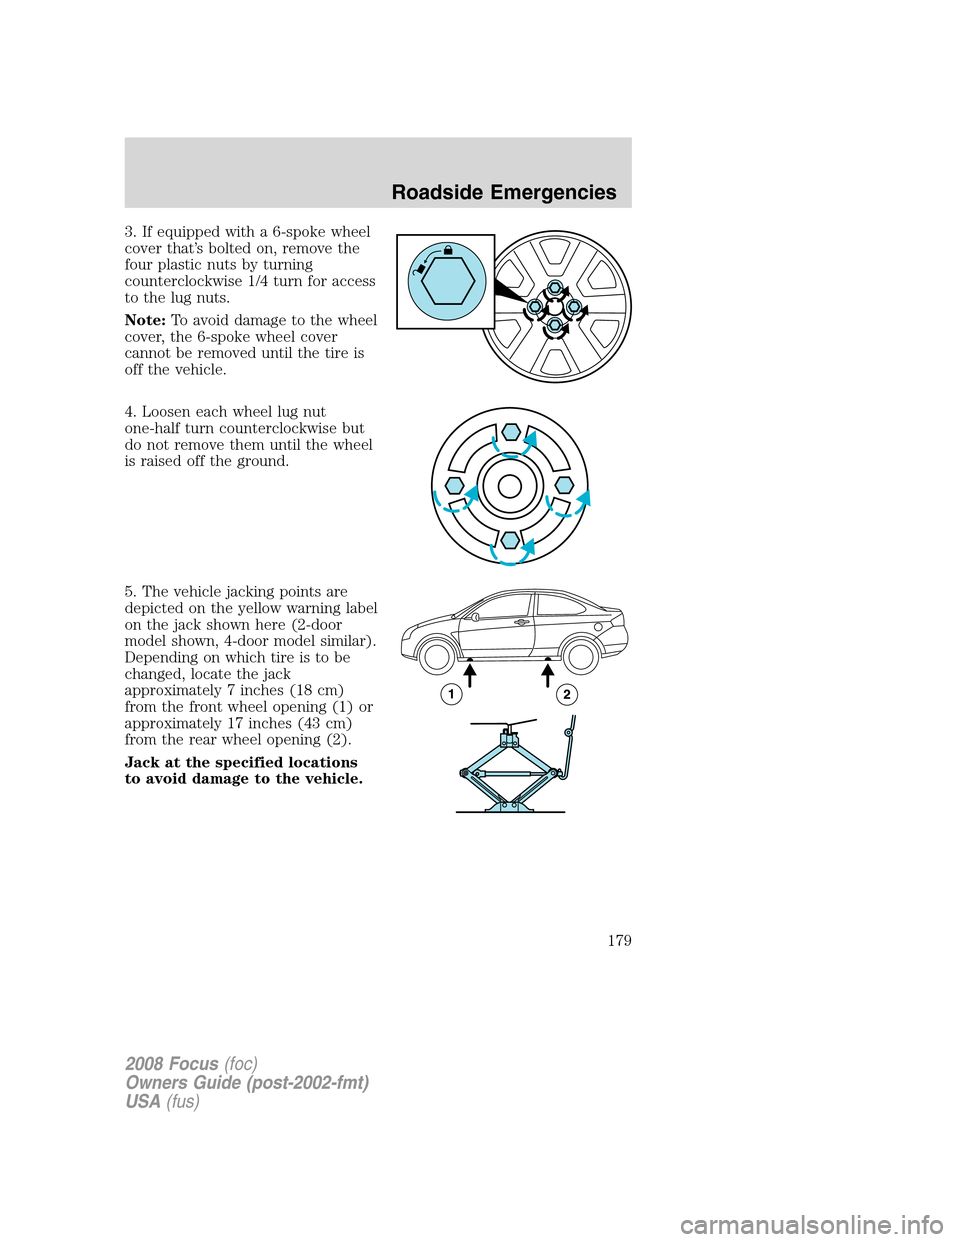 FORD FOCUS 2008 2.G Owners Guide 3. If equipped with a 6-spoke wheel
cover that’s bolted on, remove the
four plastic nuts by turning
counterclockwise 1/4 turn for access
to the lug nuts.
Note:To avoid damage to the wheel
cover, the